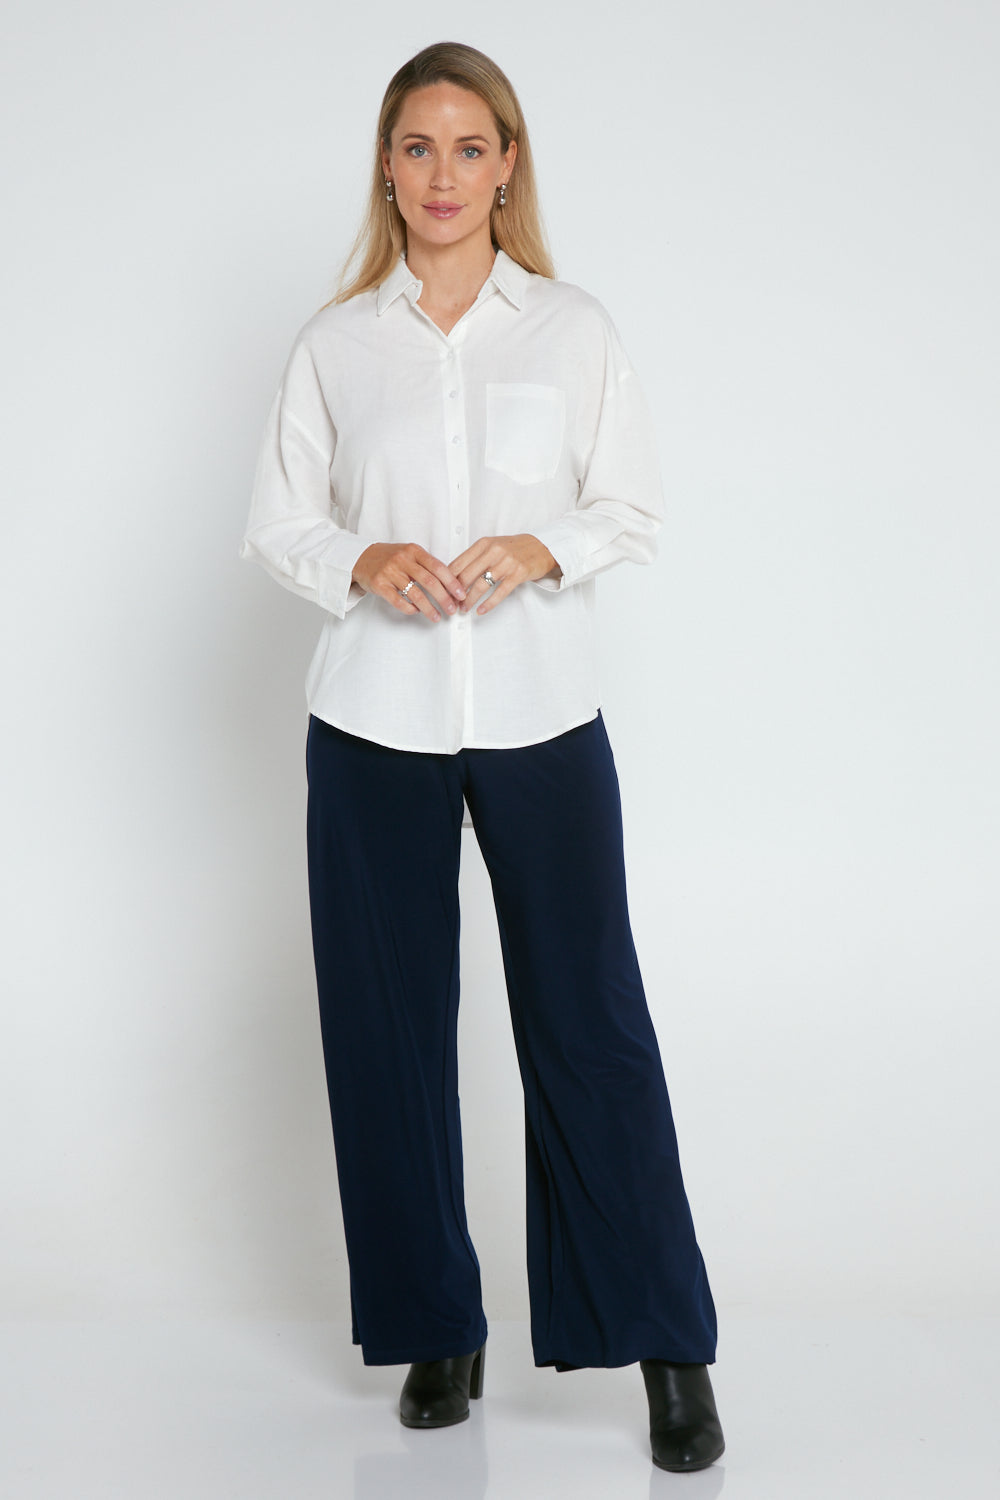 Wide Leg Must Have Pants - Navy